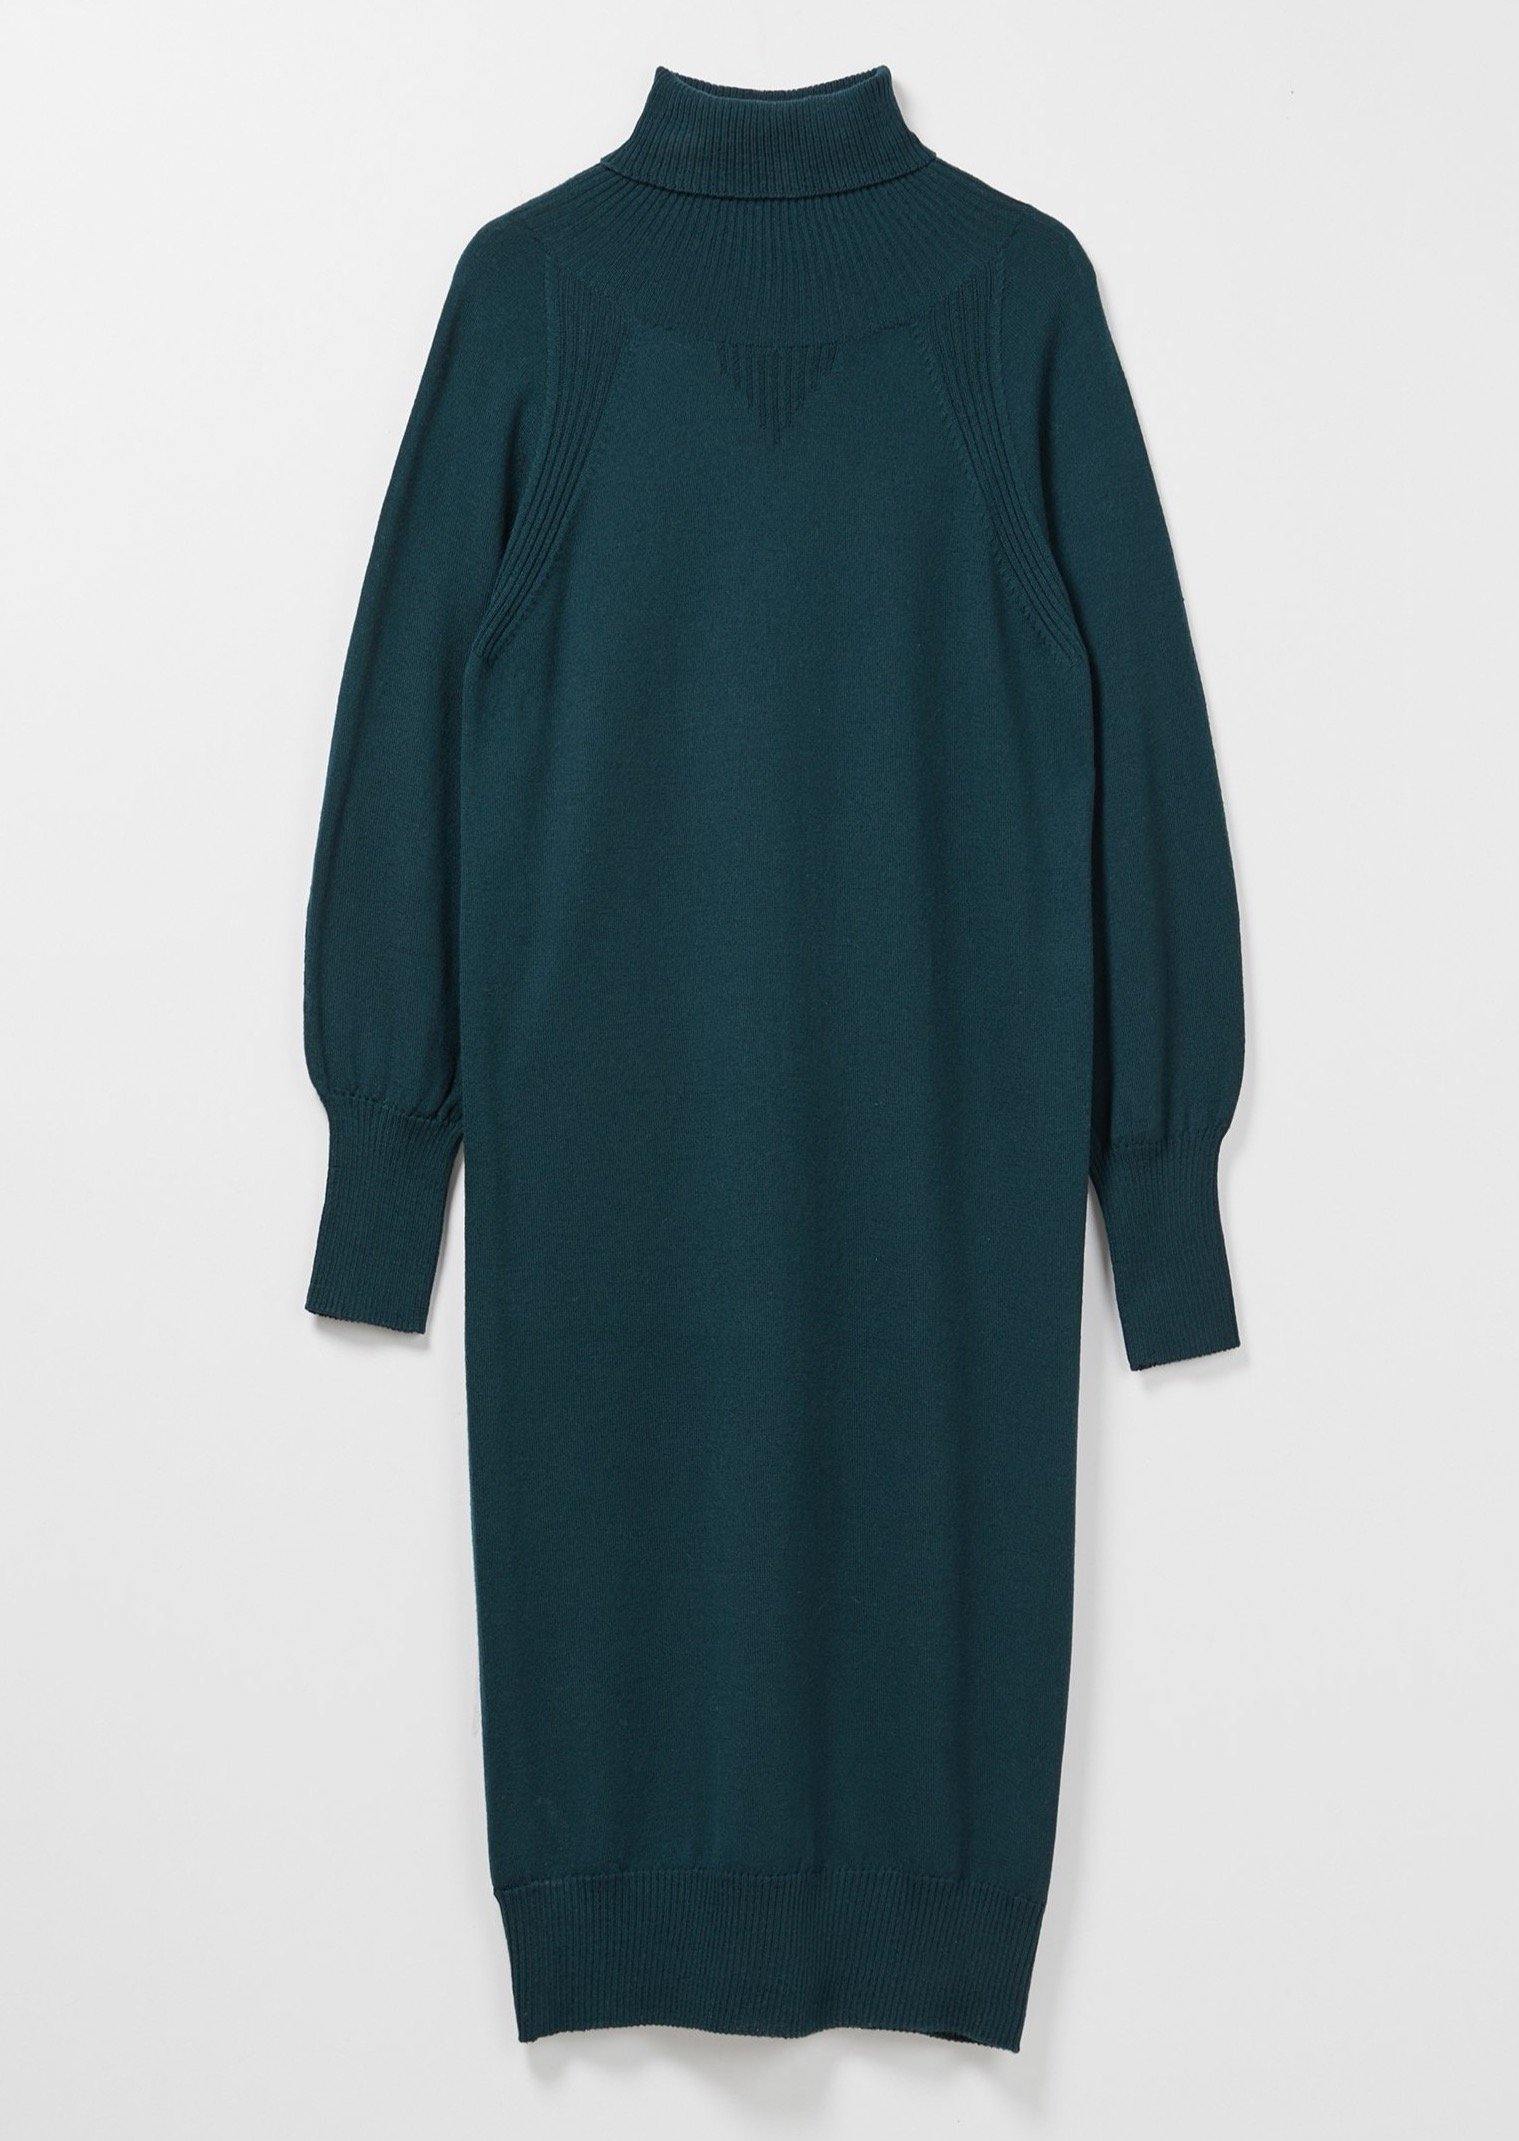 Gaudi Polo Neck Relax Fit Dress